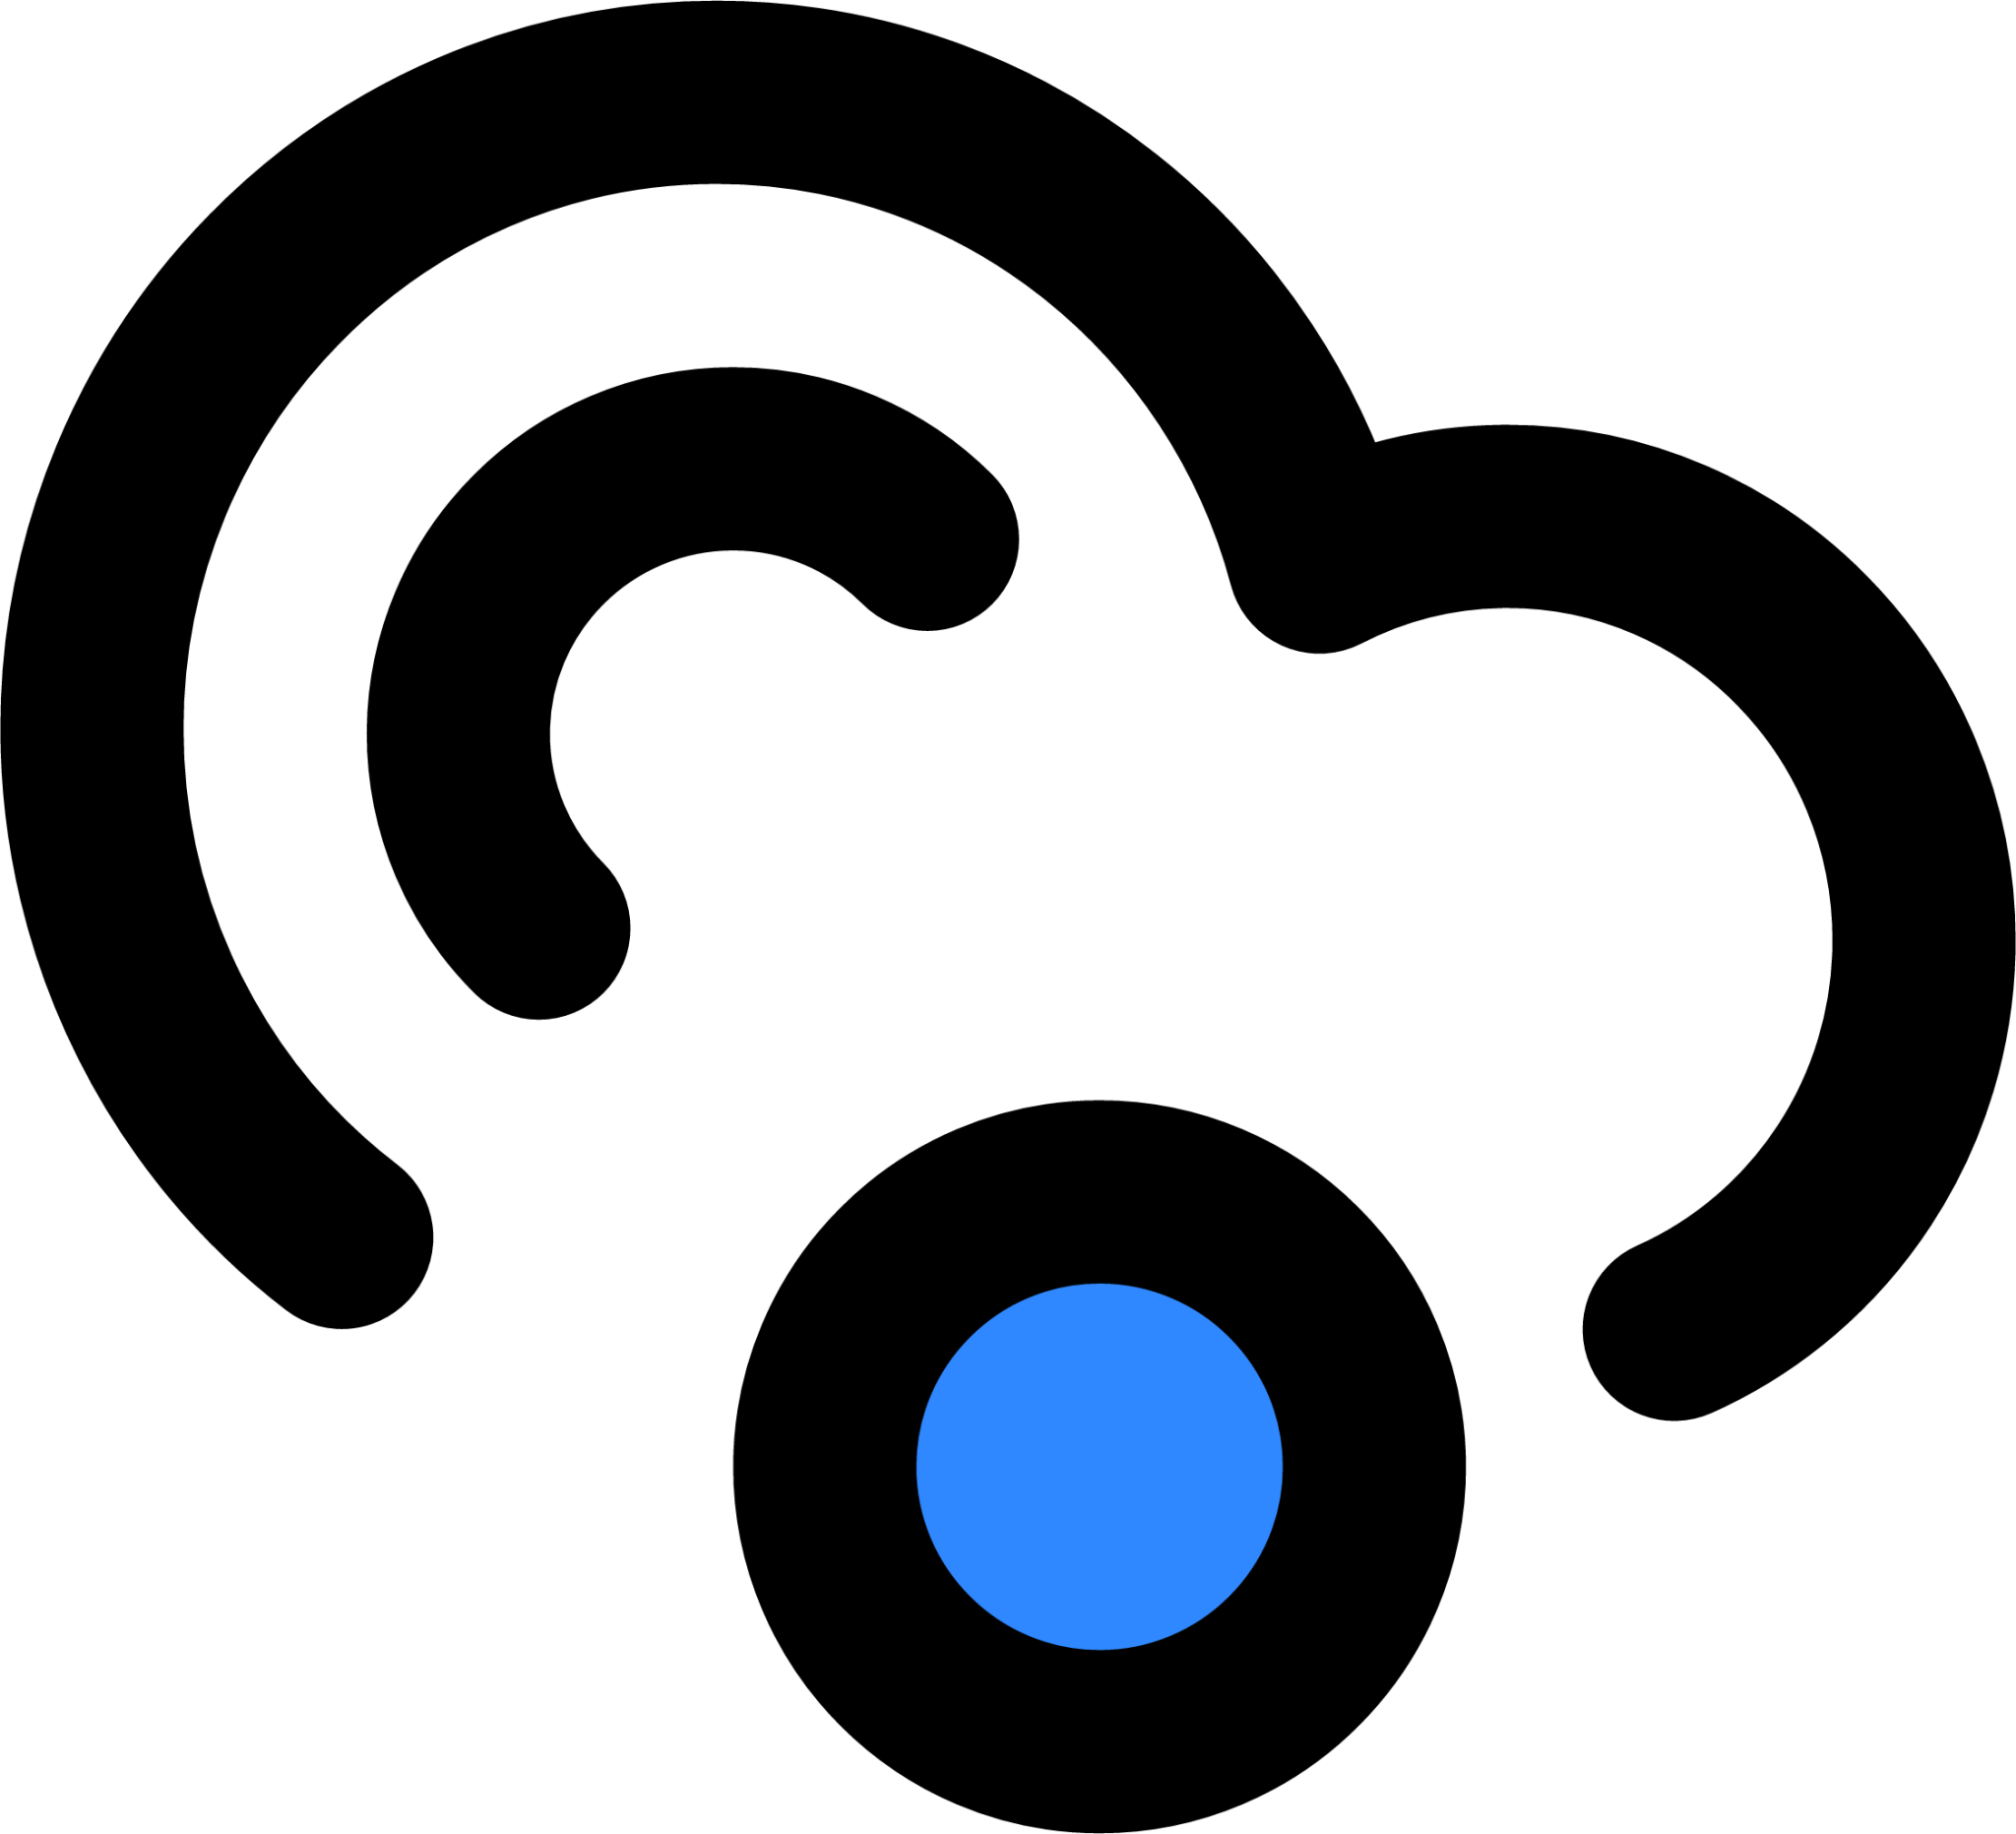 cloudy icon